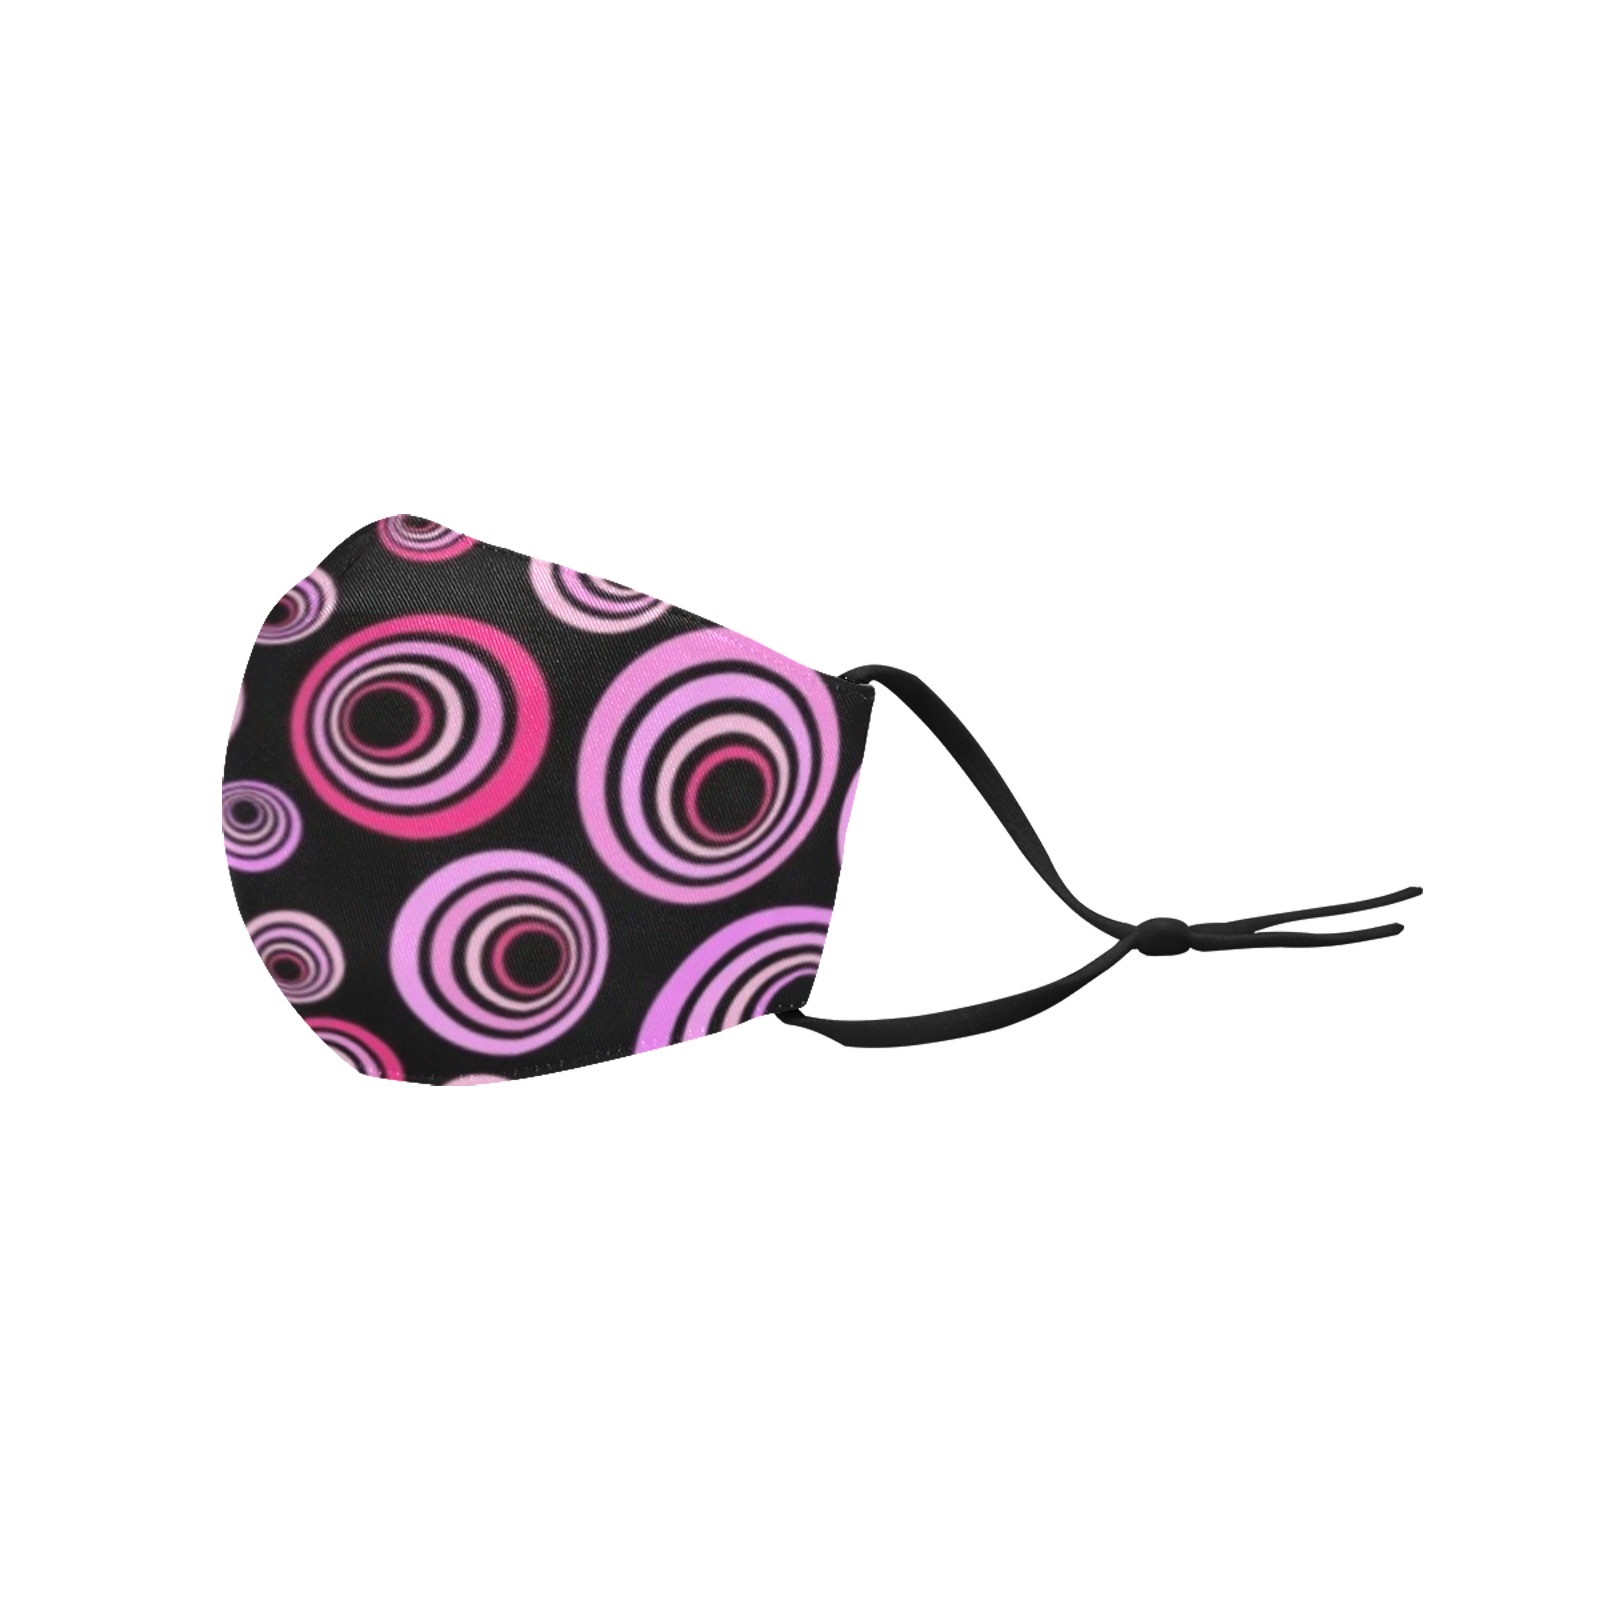 Retro Psychedelic Pretty Pink Pattern 3D Mouth Mask with Drawstring (Pack of 50) (Model M04)